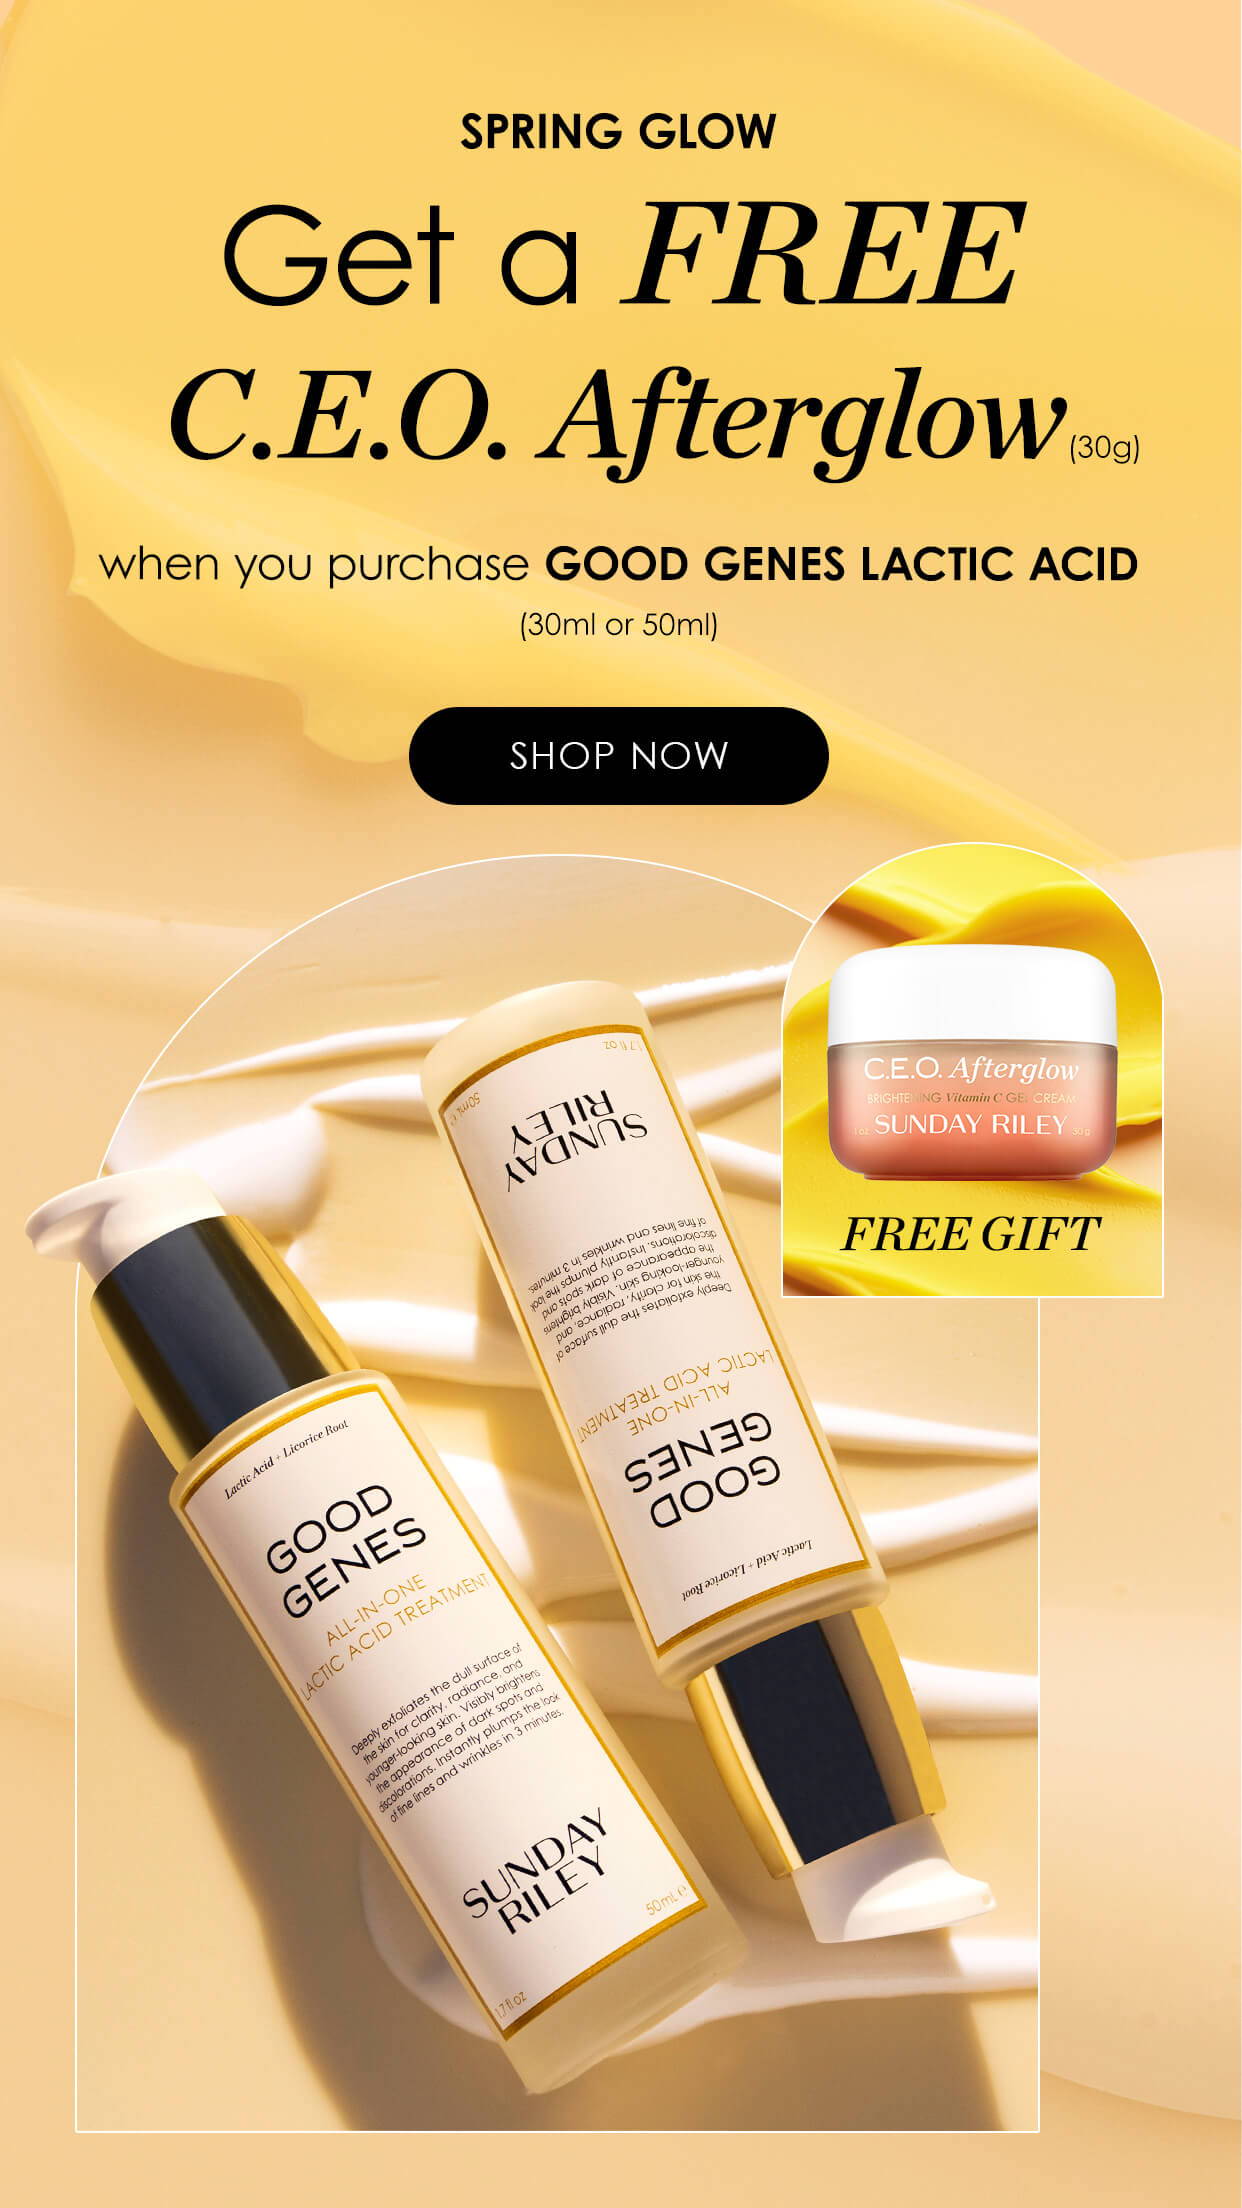 Spring Glow - Get a FREE C.E.O. Afterglow when you purchase GOOD GENES LACTIC 30ml or 50ml